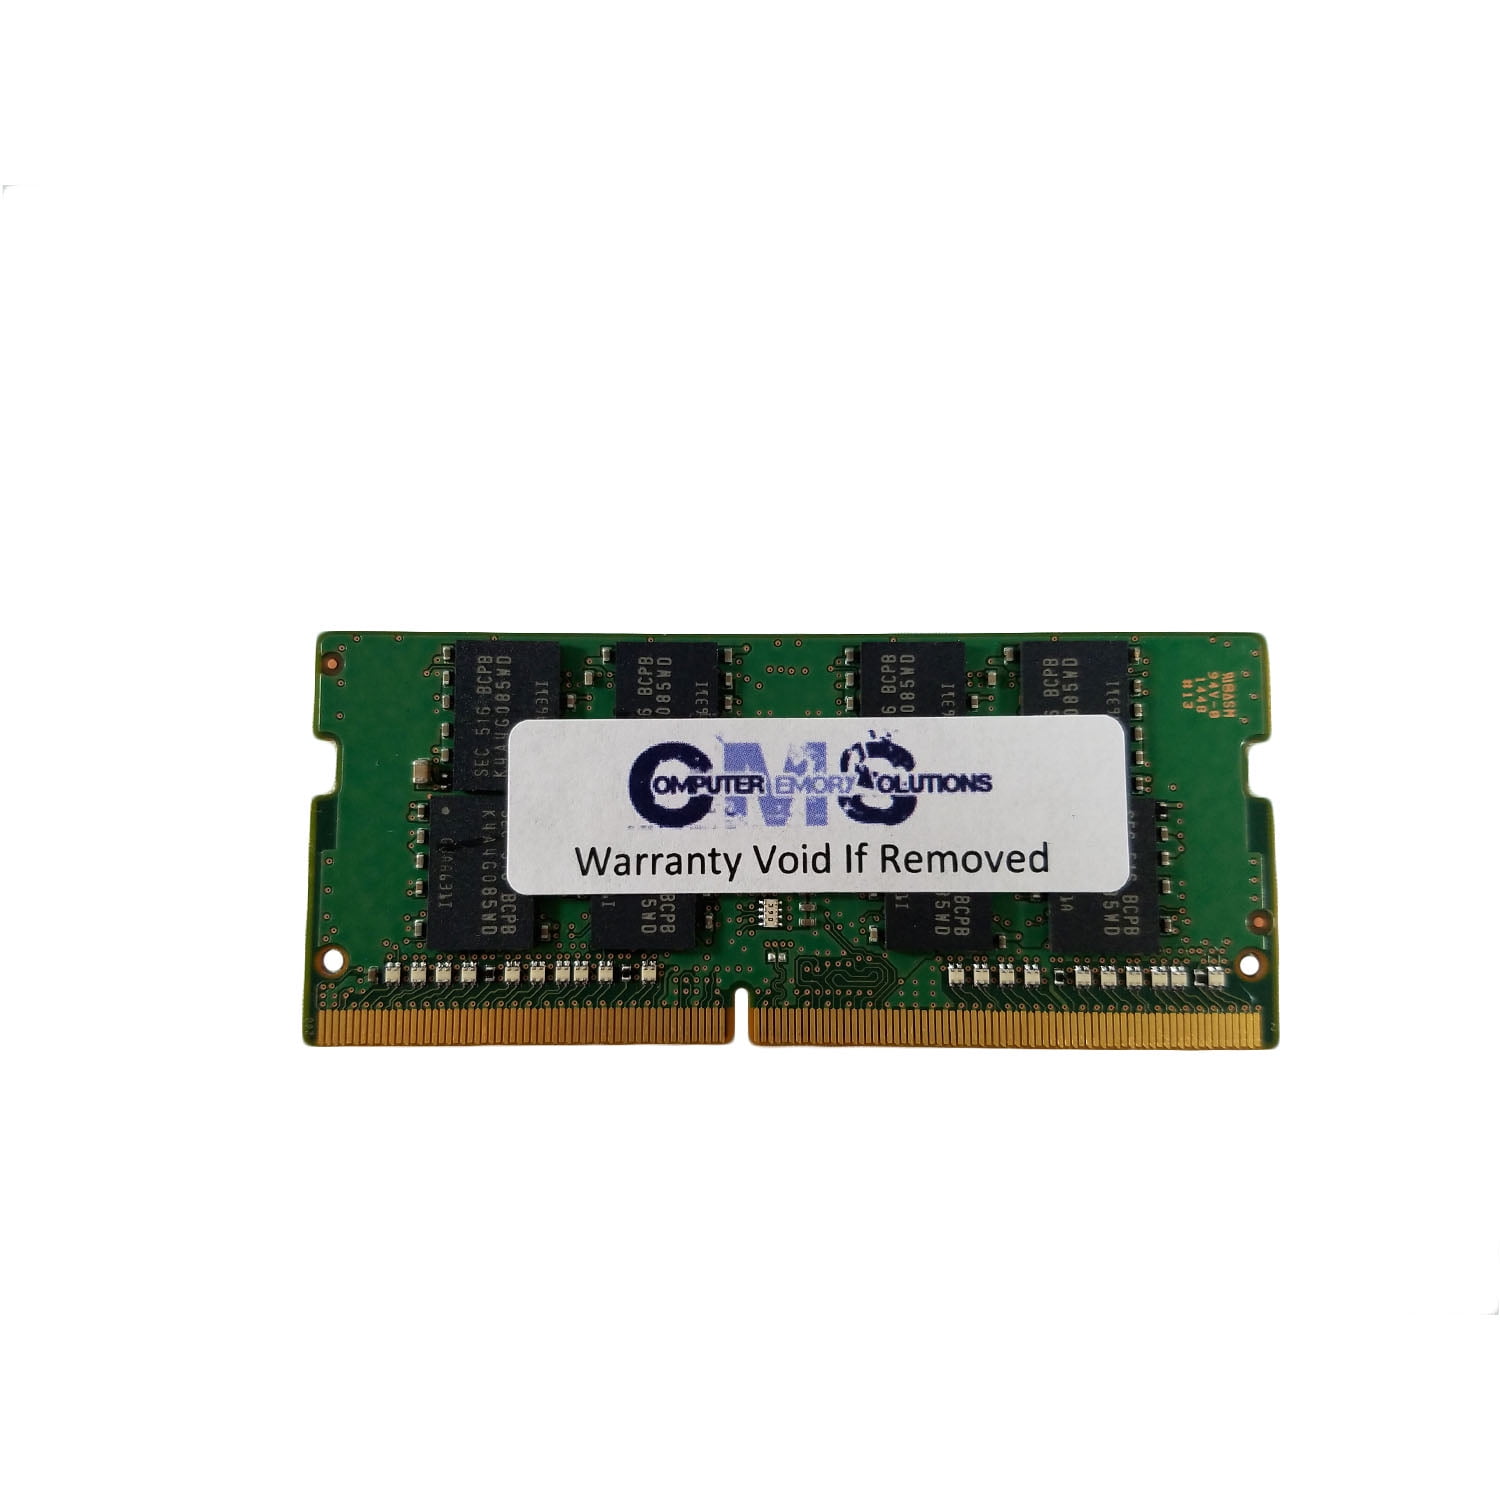 RAM Memory Upgrade for The Acer Aspire AS5750-6643 2GB DDR3-1066 PC3-8500